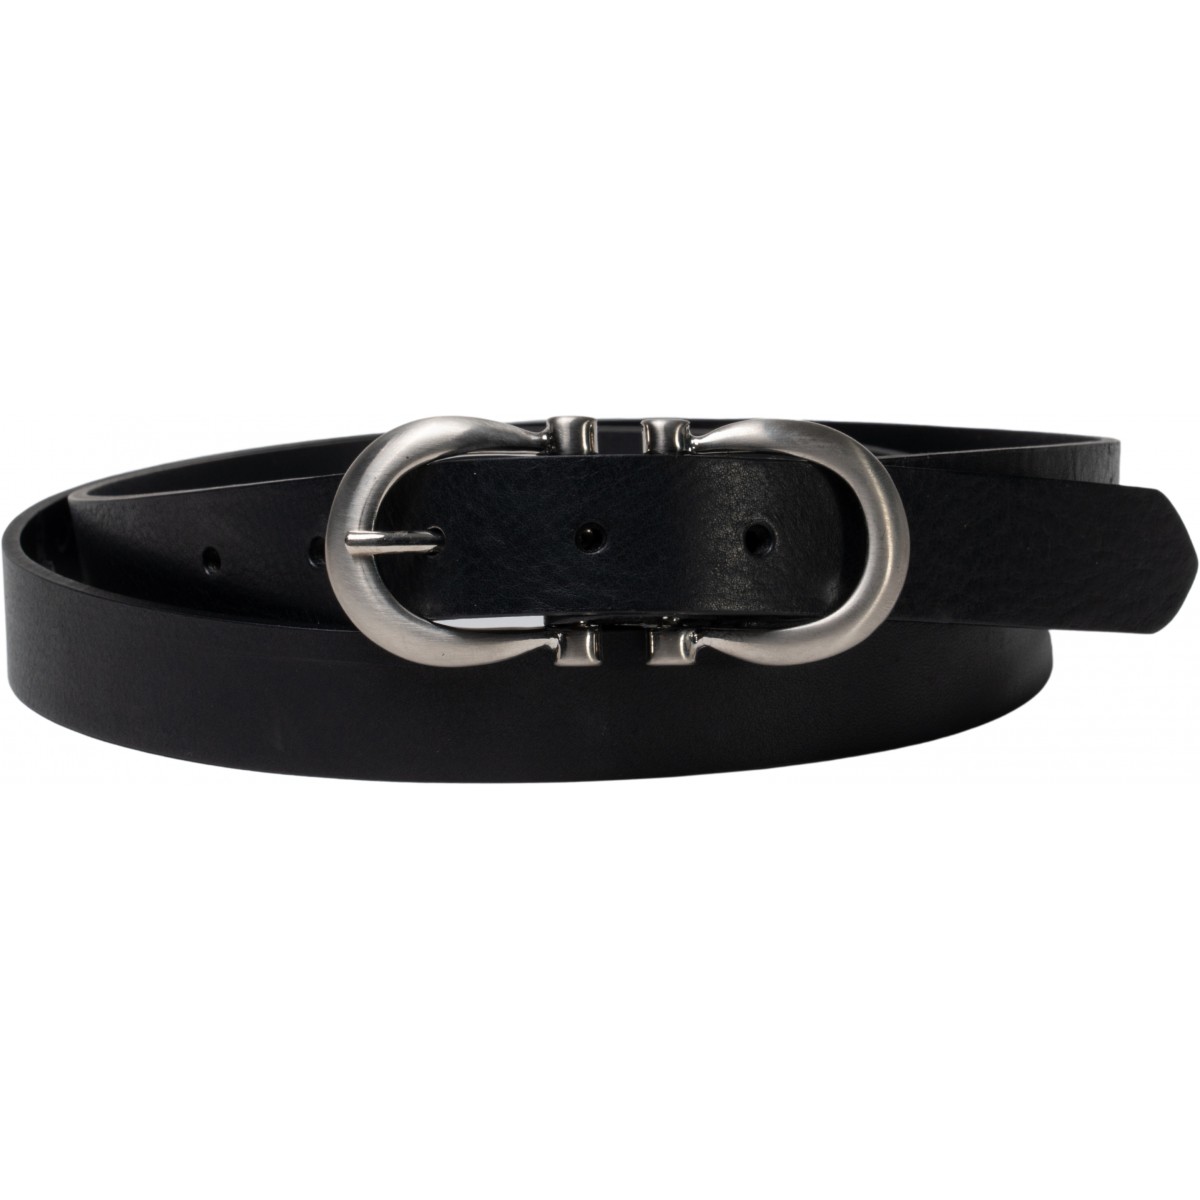 Handmade black leather belt with metal figure eight buckle | The ...